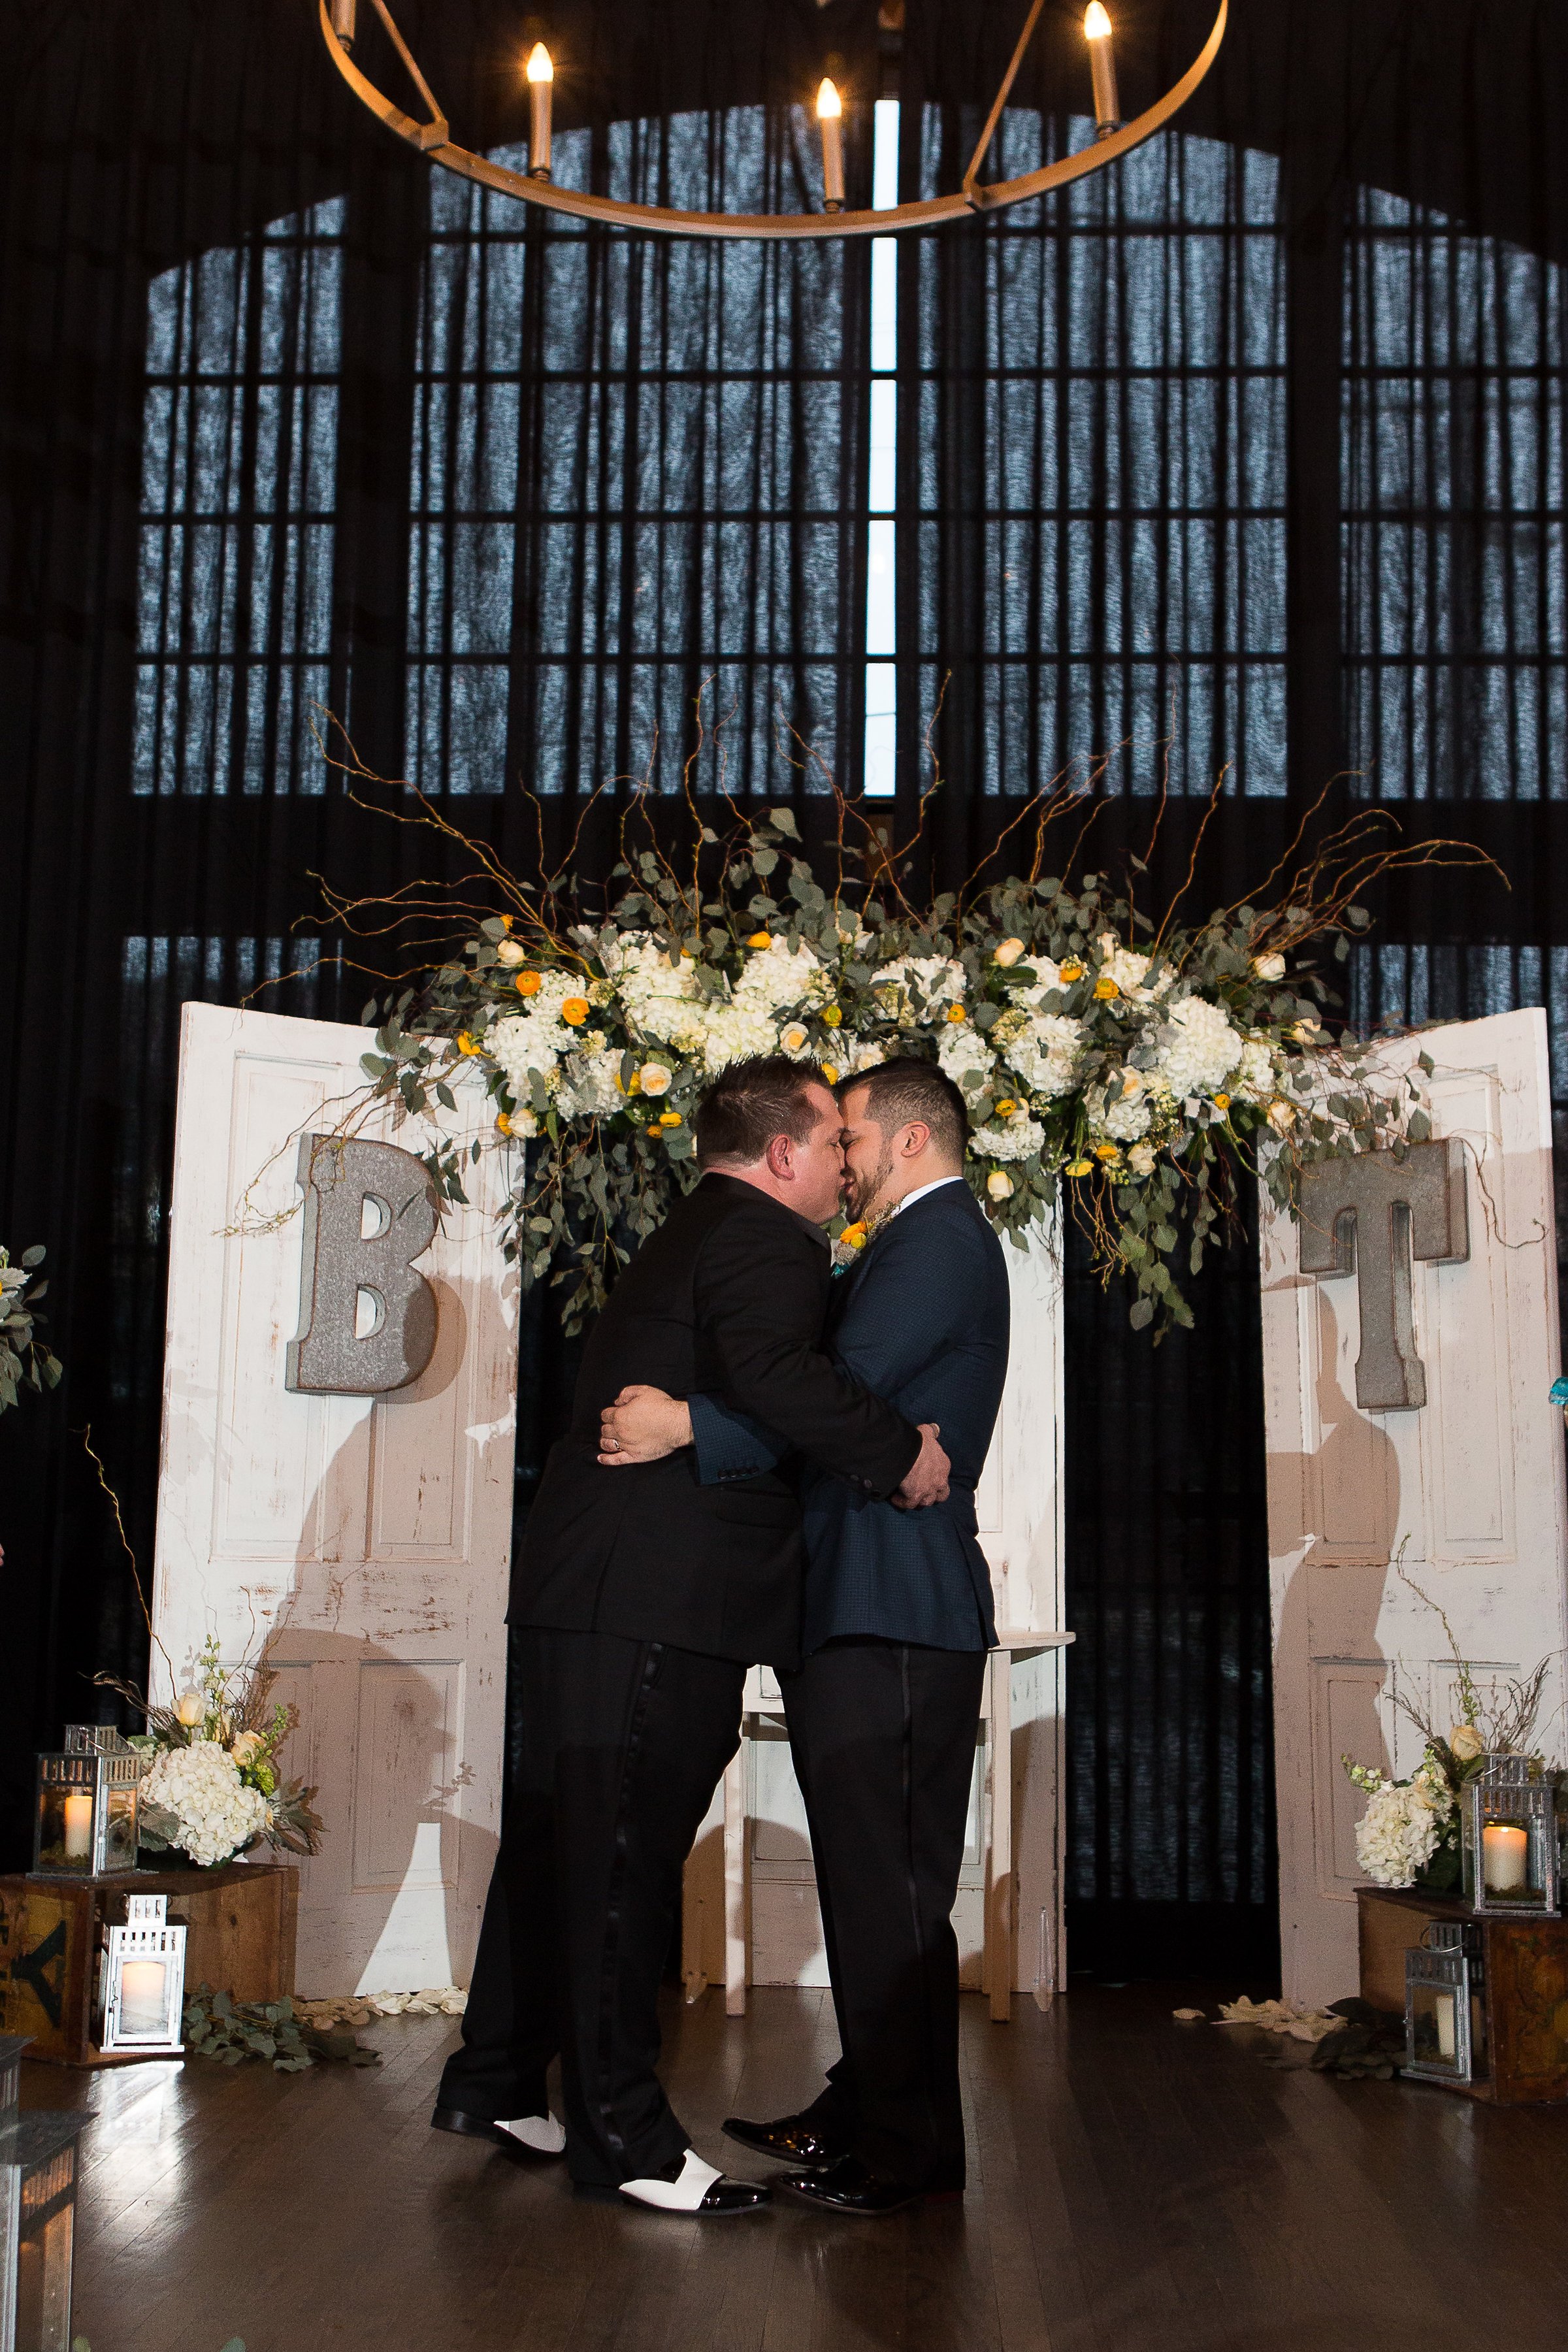  Two grooms embrace and kiss at their altar made up of doors and a beautiful floral tapestry within an industrial wedding venue.  